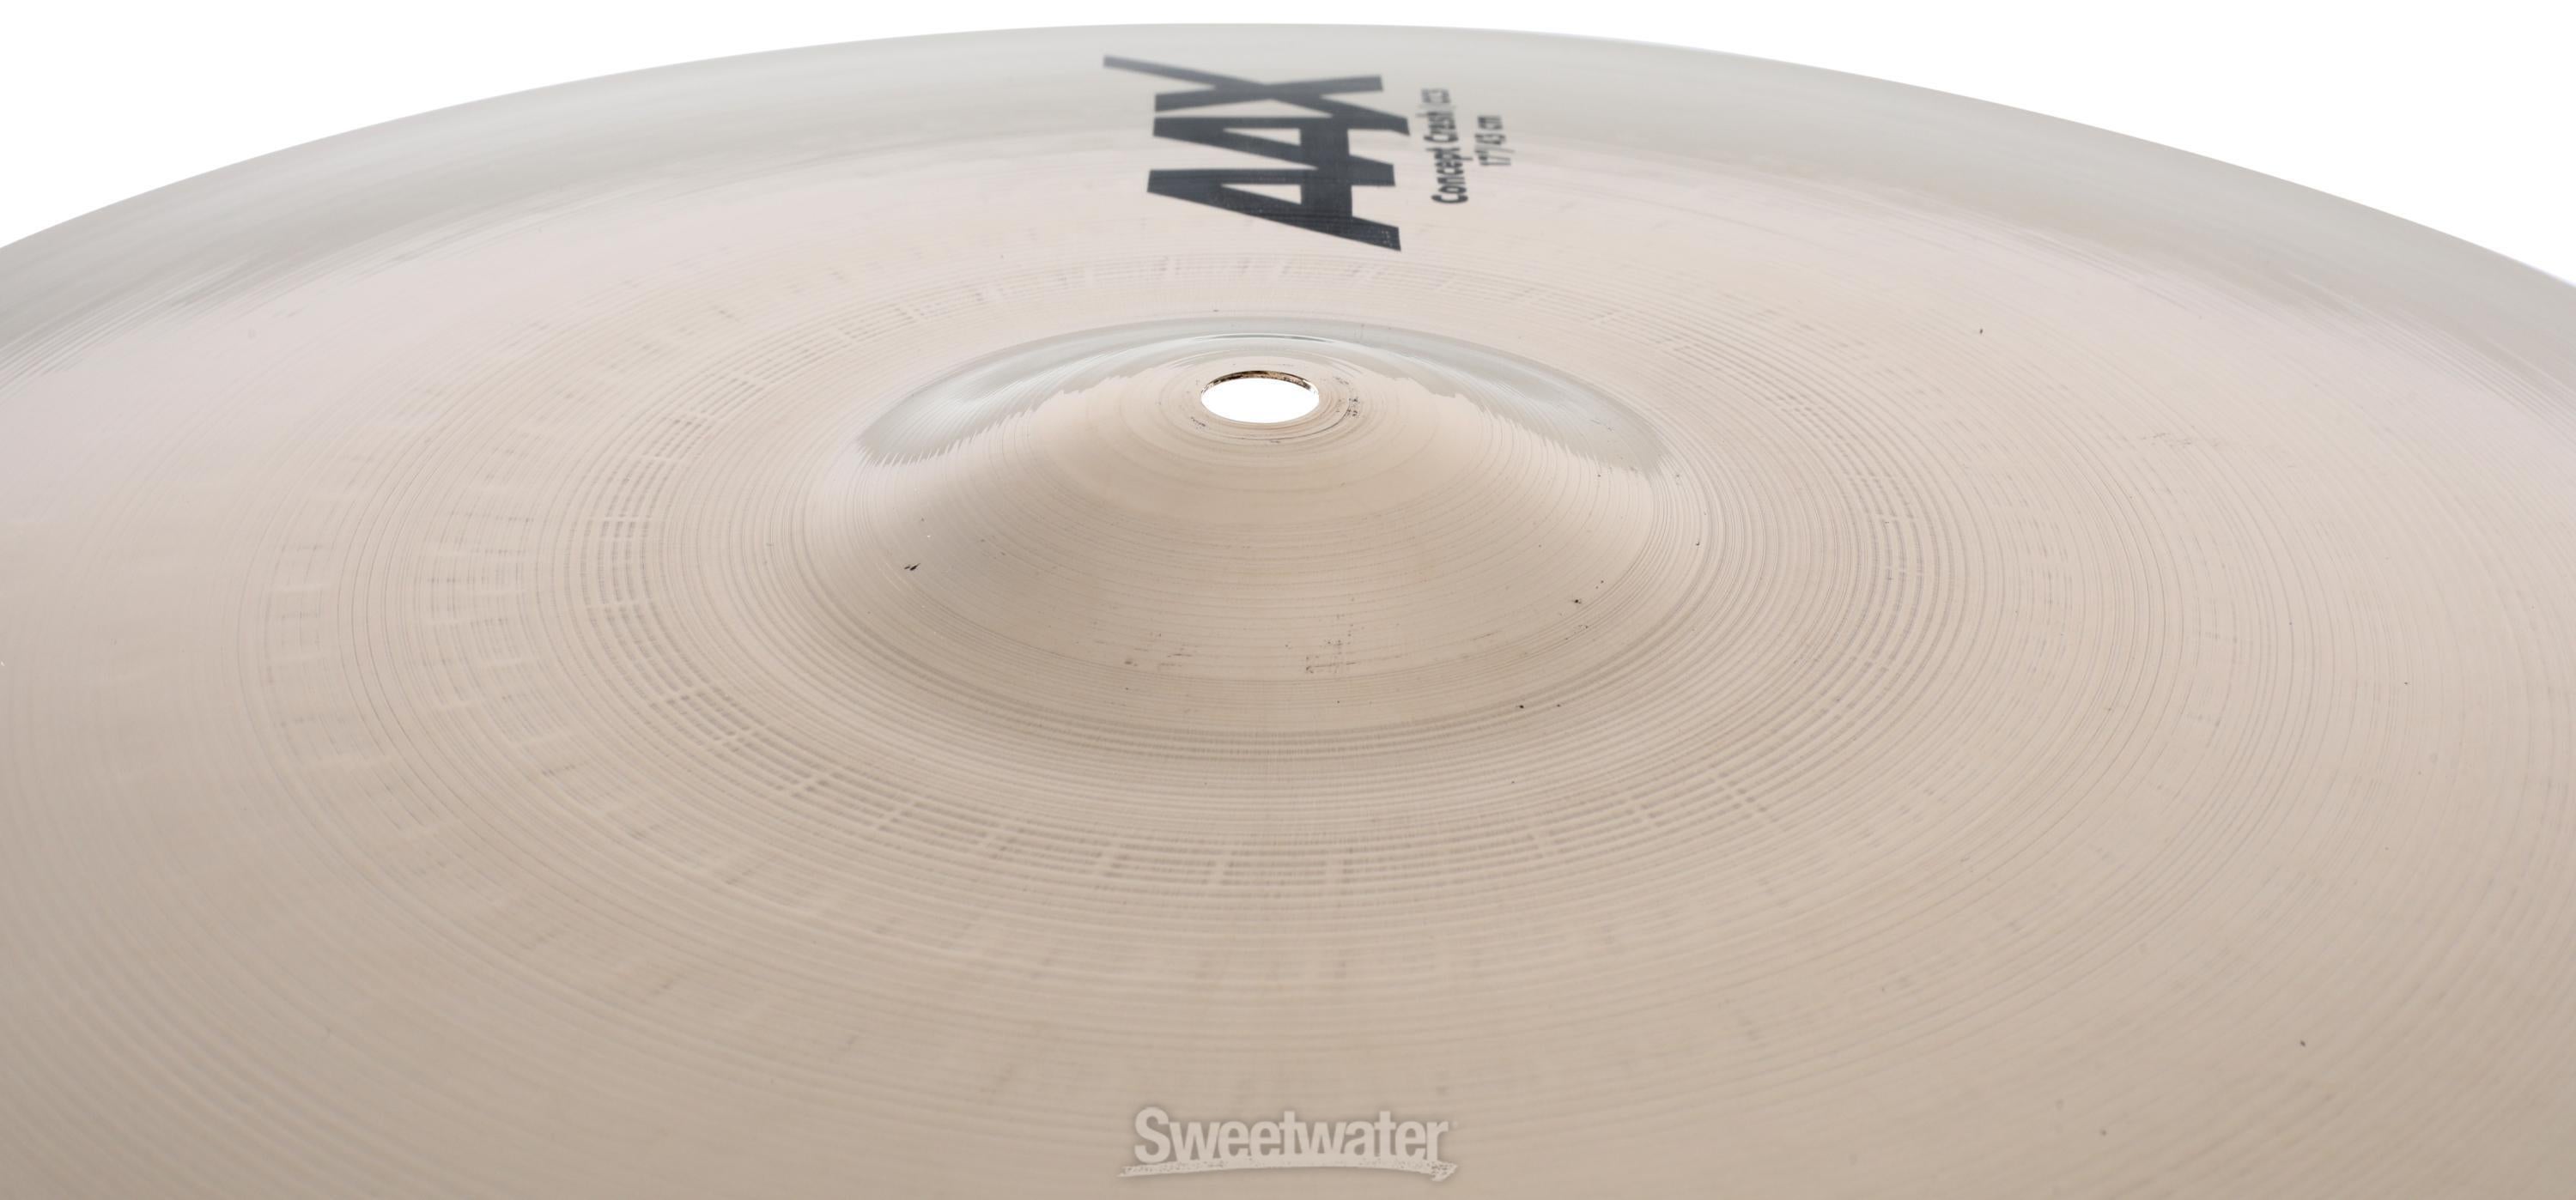 Sabian AAX Concept Crash Cymbal - 17 inch - Sweetwater Exclusive